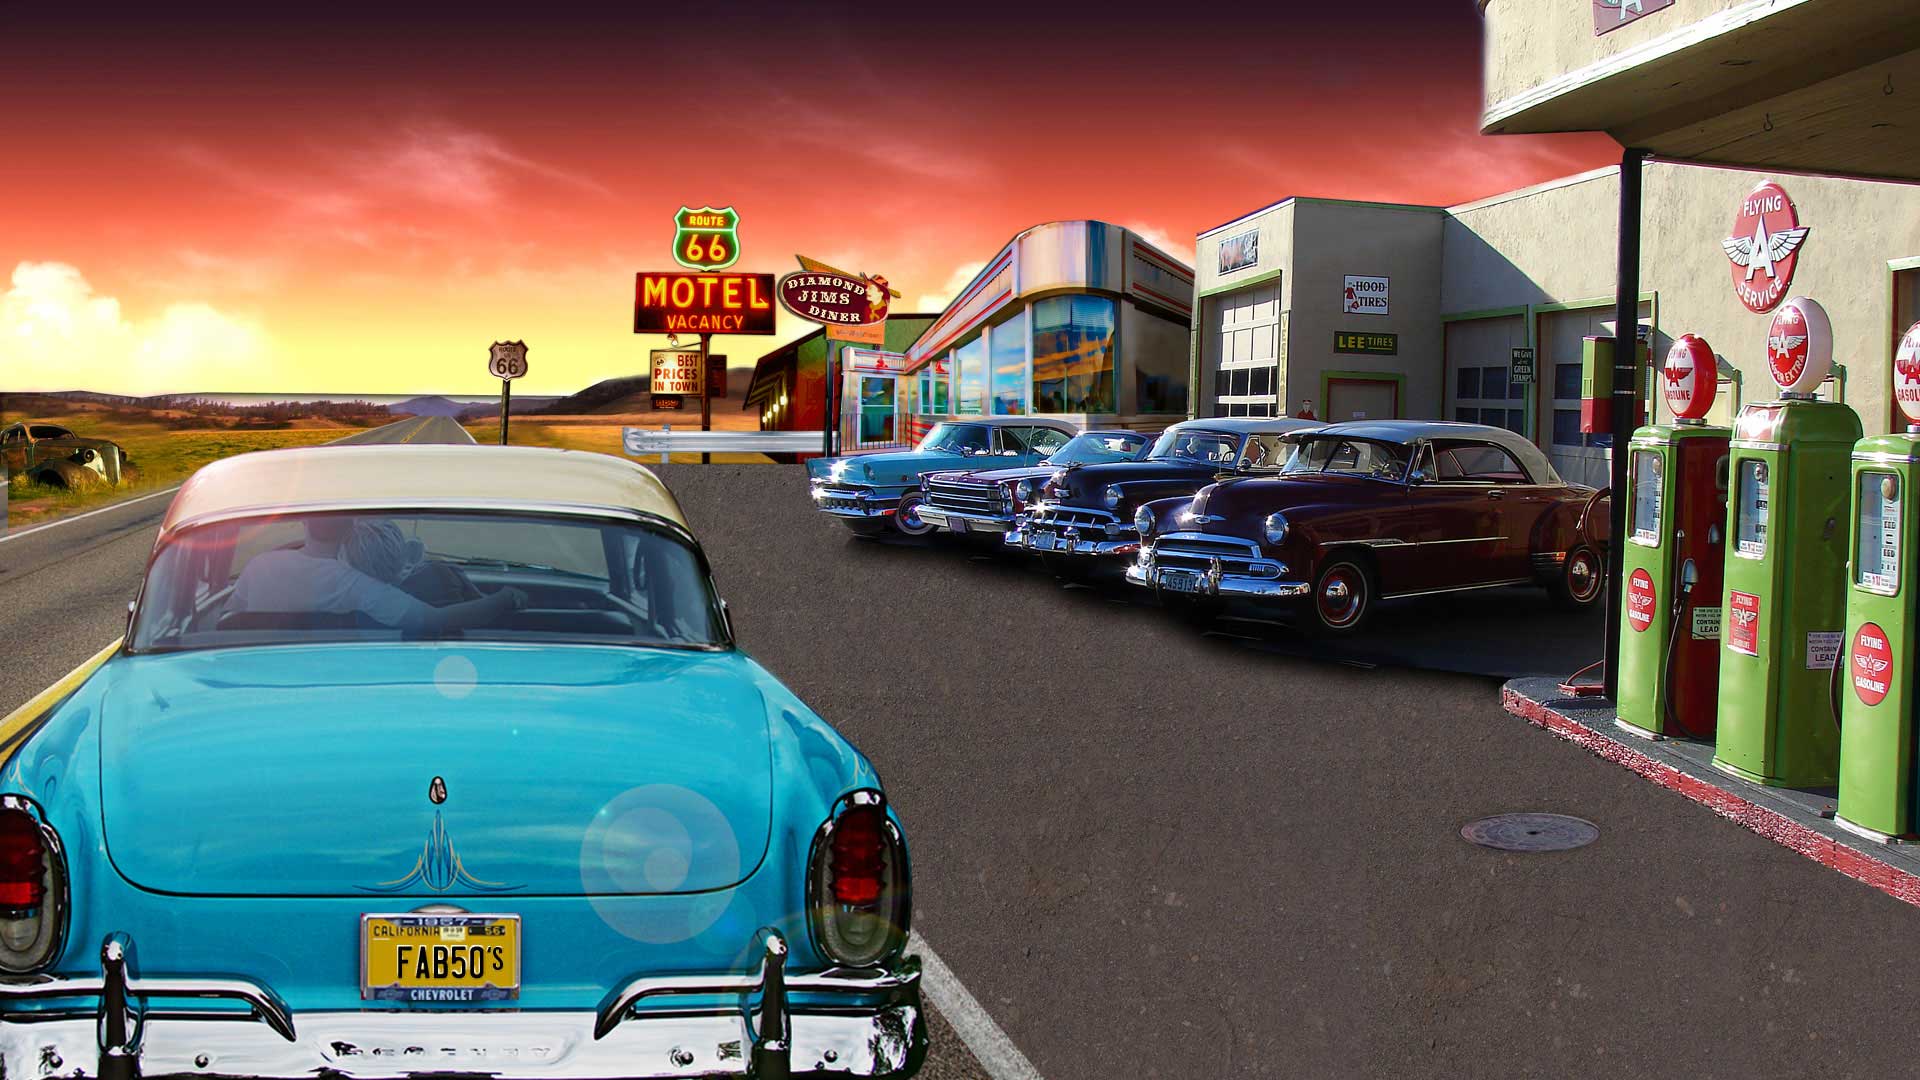 American Classic Cars From the 50s